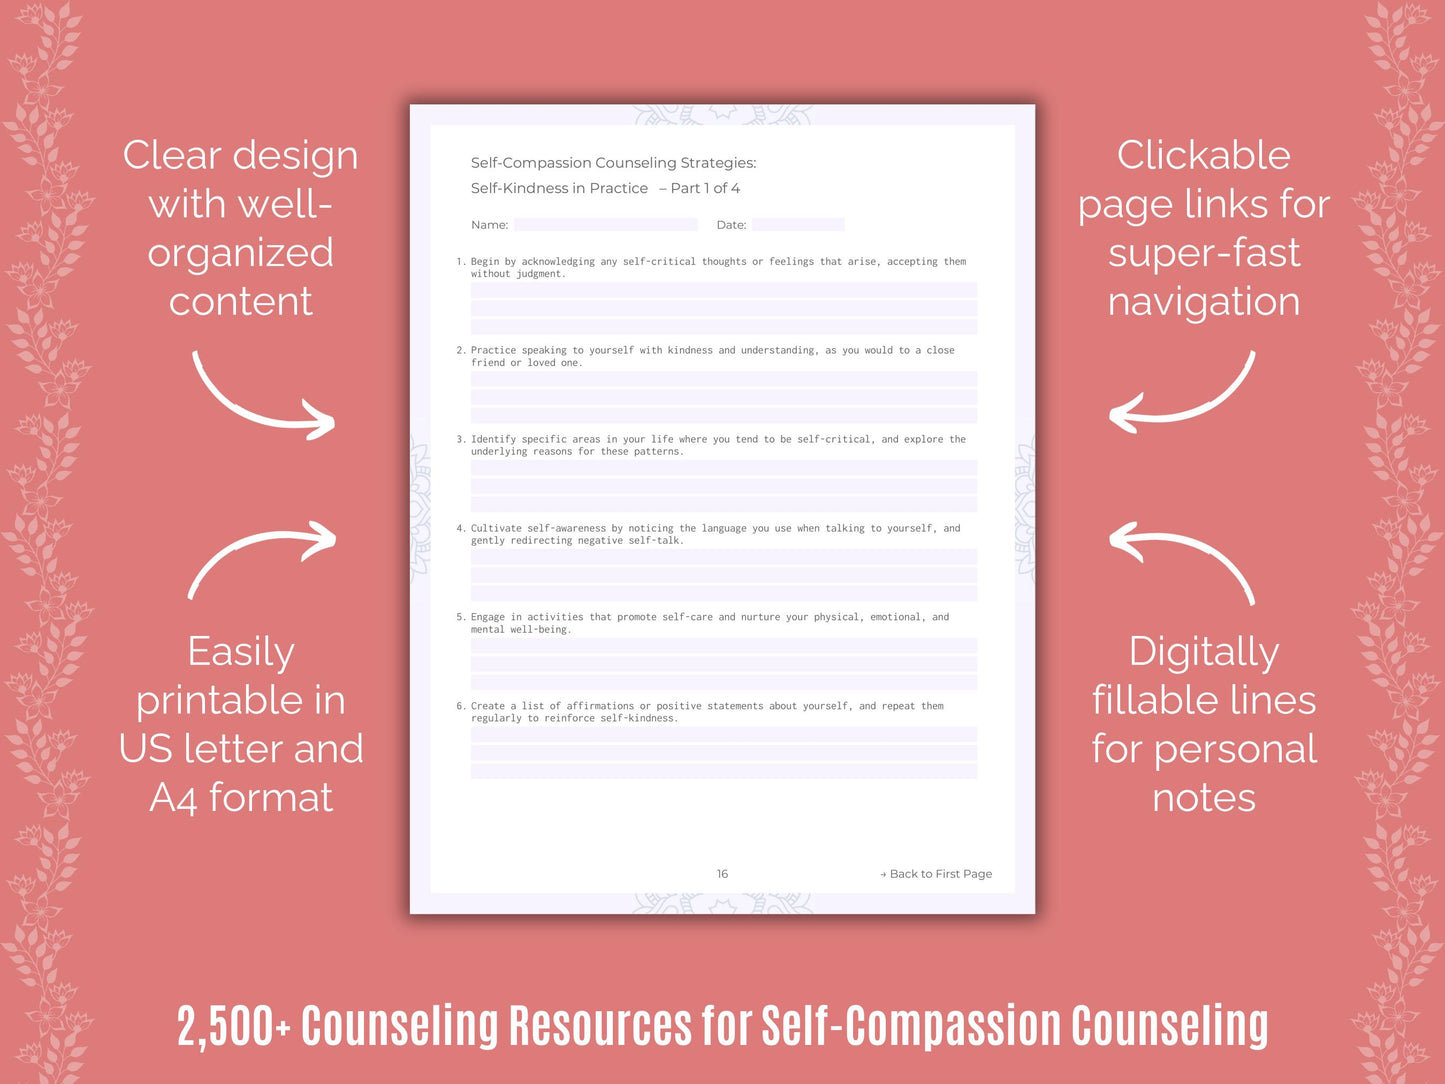 Worksheet, Workbook, Therapist, Template, Resource, Therapy, Content, Self-Compassion Tool, Self-Compassion Idea, Counseling, Self-Compassion, Mental Health, Counselor